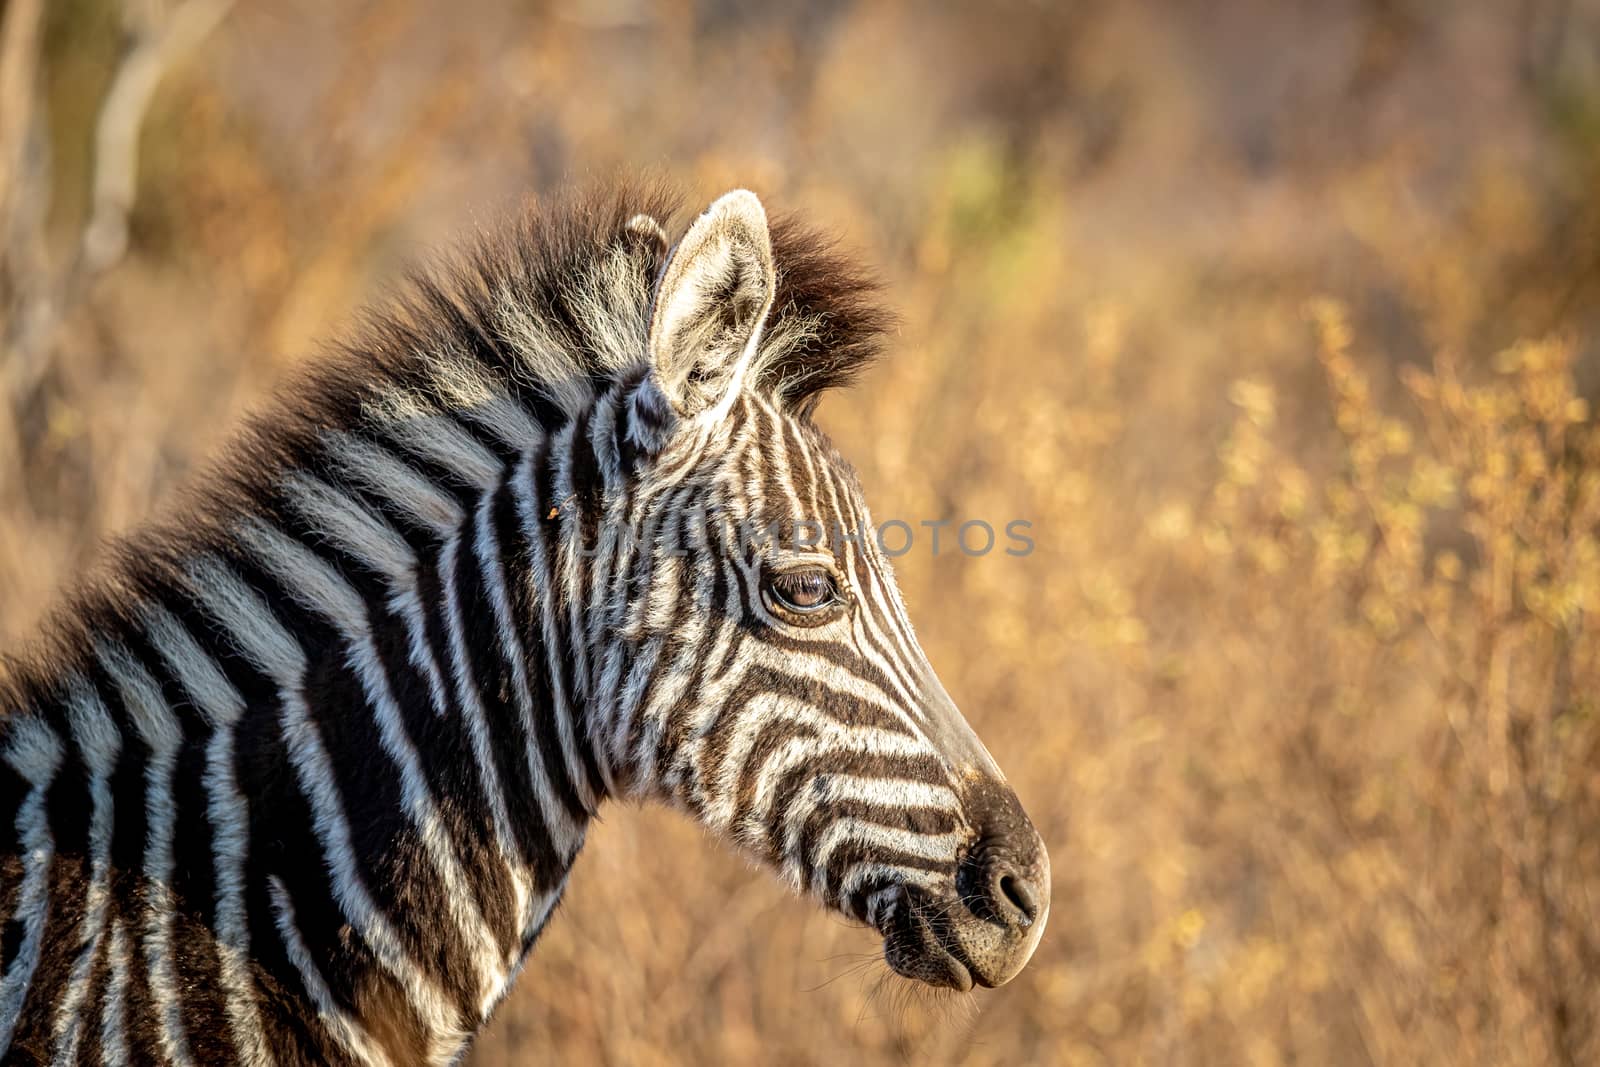 Close up of a young Zebra in the Welgevonden game reserve, South Africa.